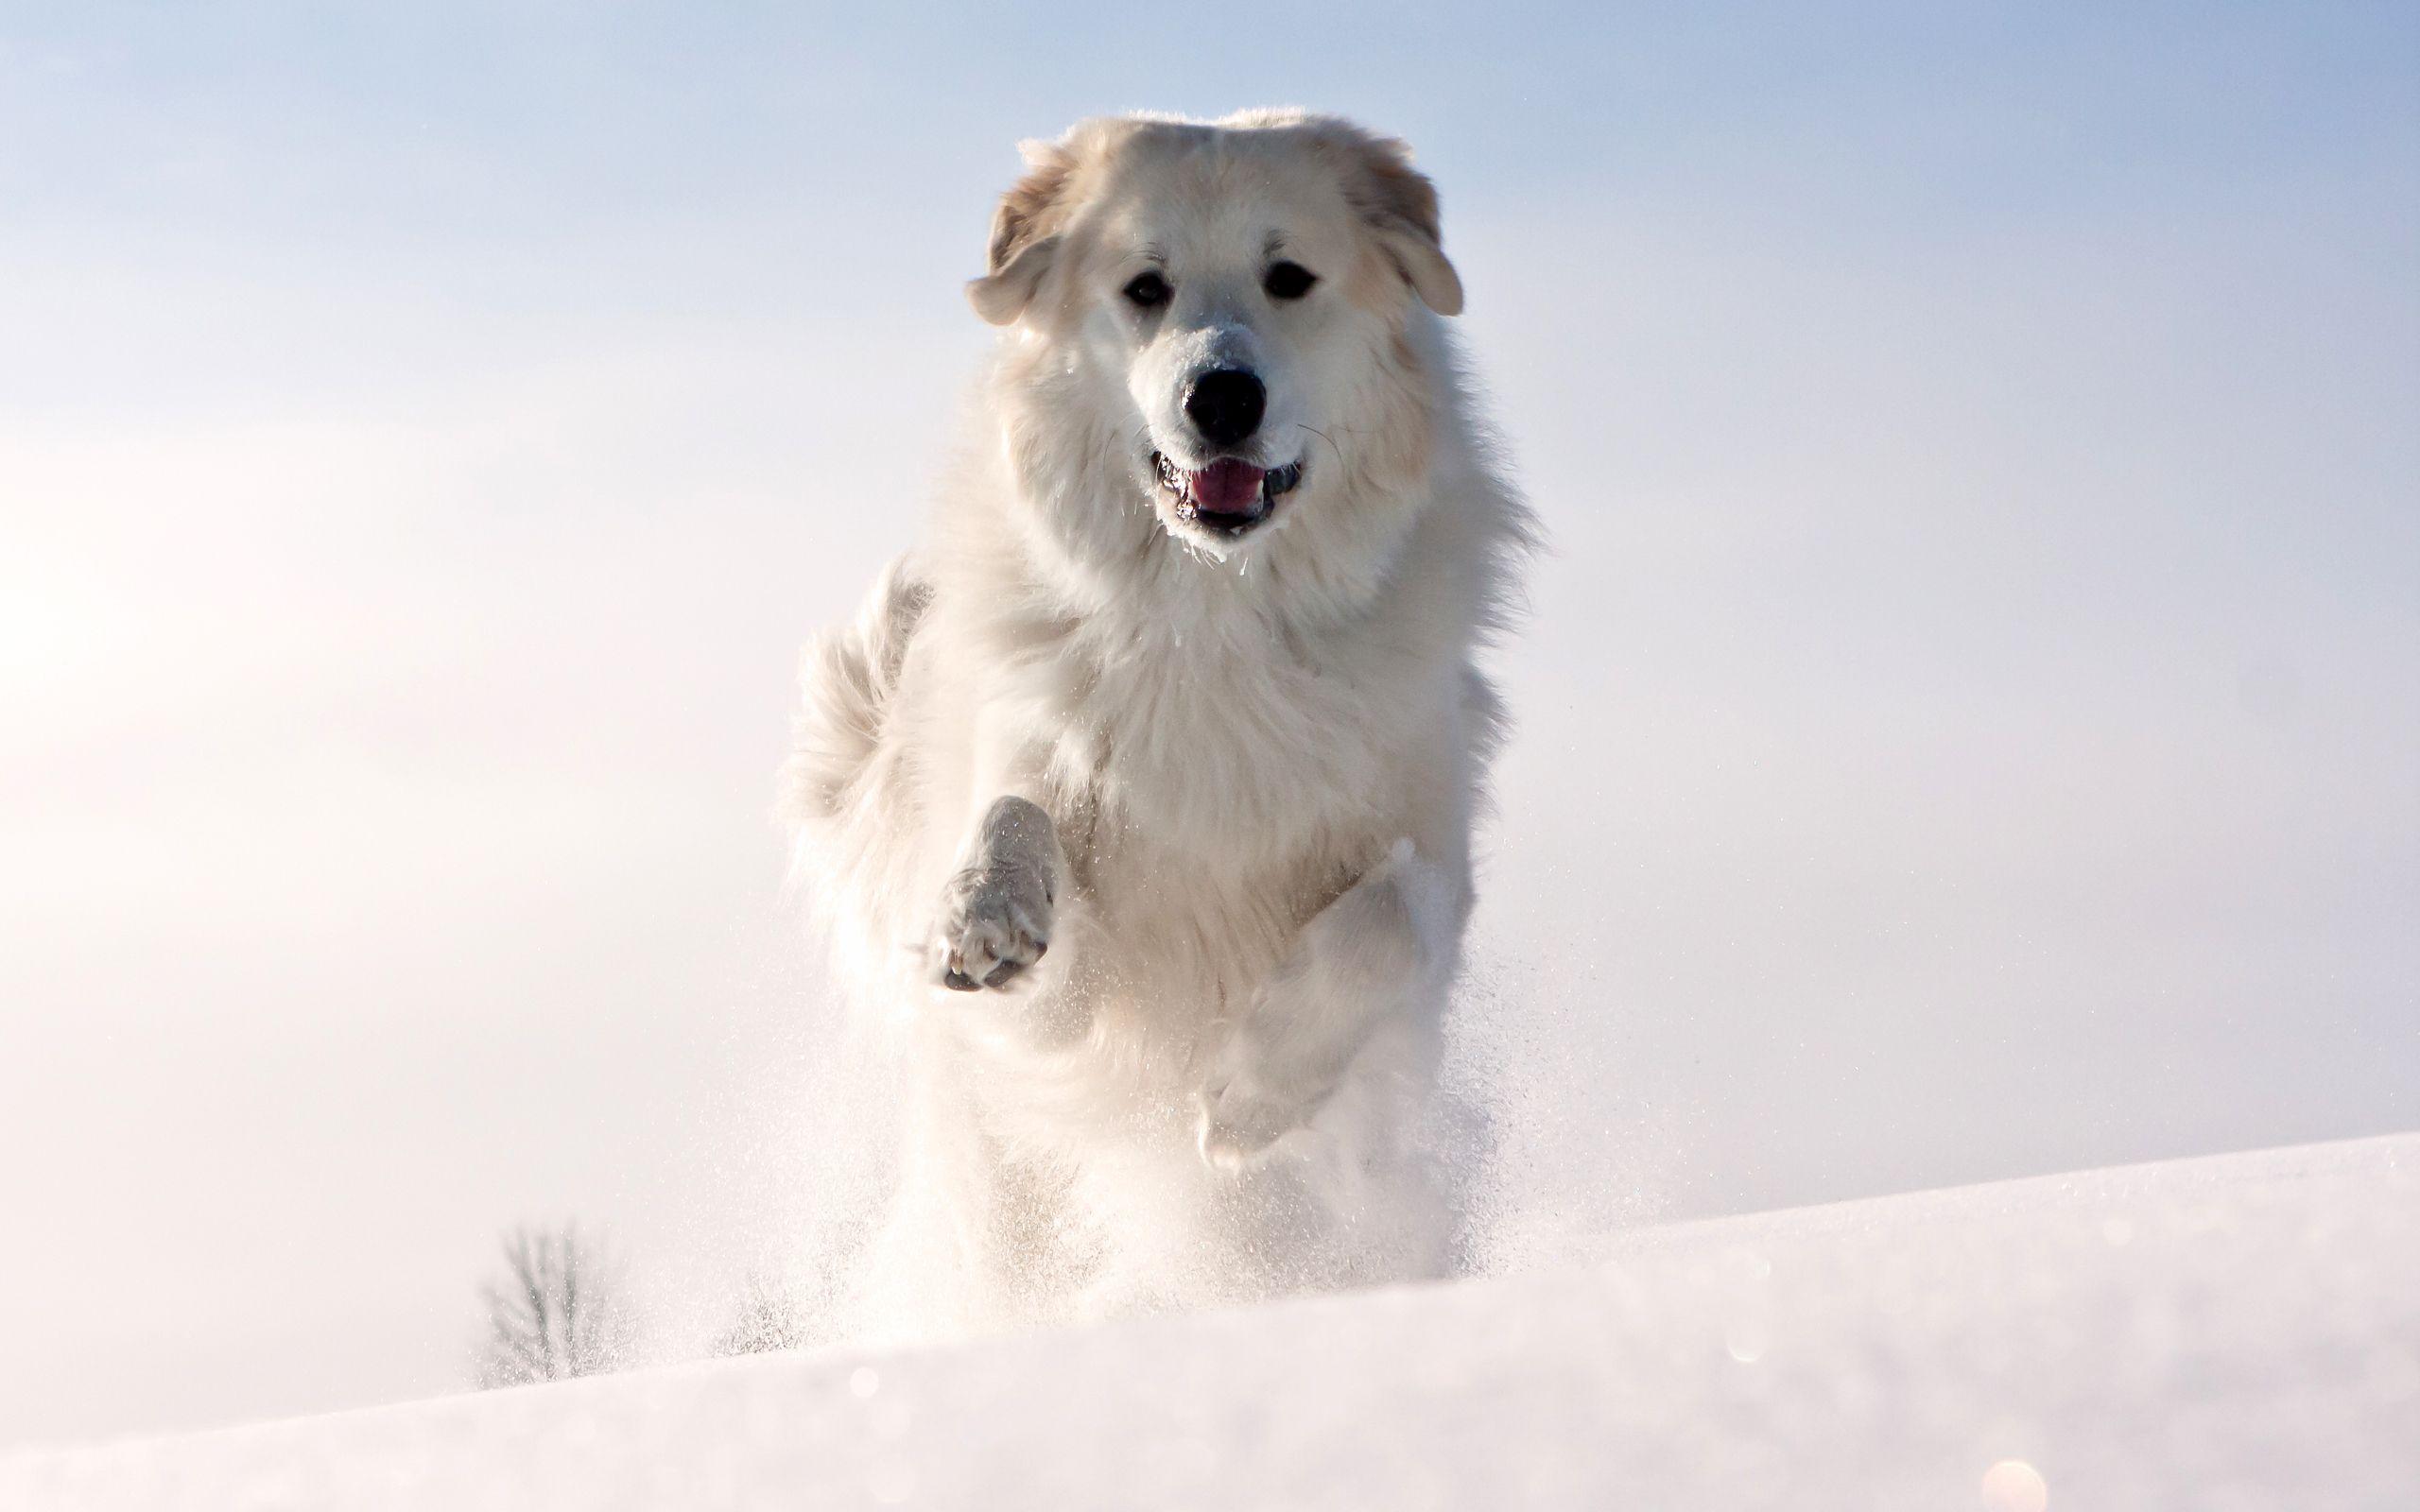 HD Snow Dog Wallpaper. Download Free -112104. Snow dogs, Dog background, Dogs